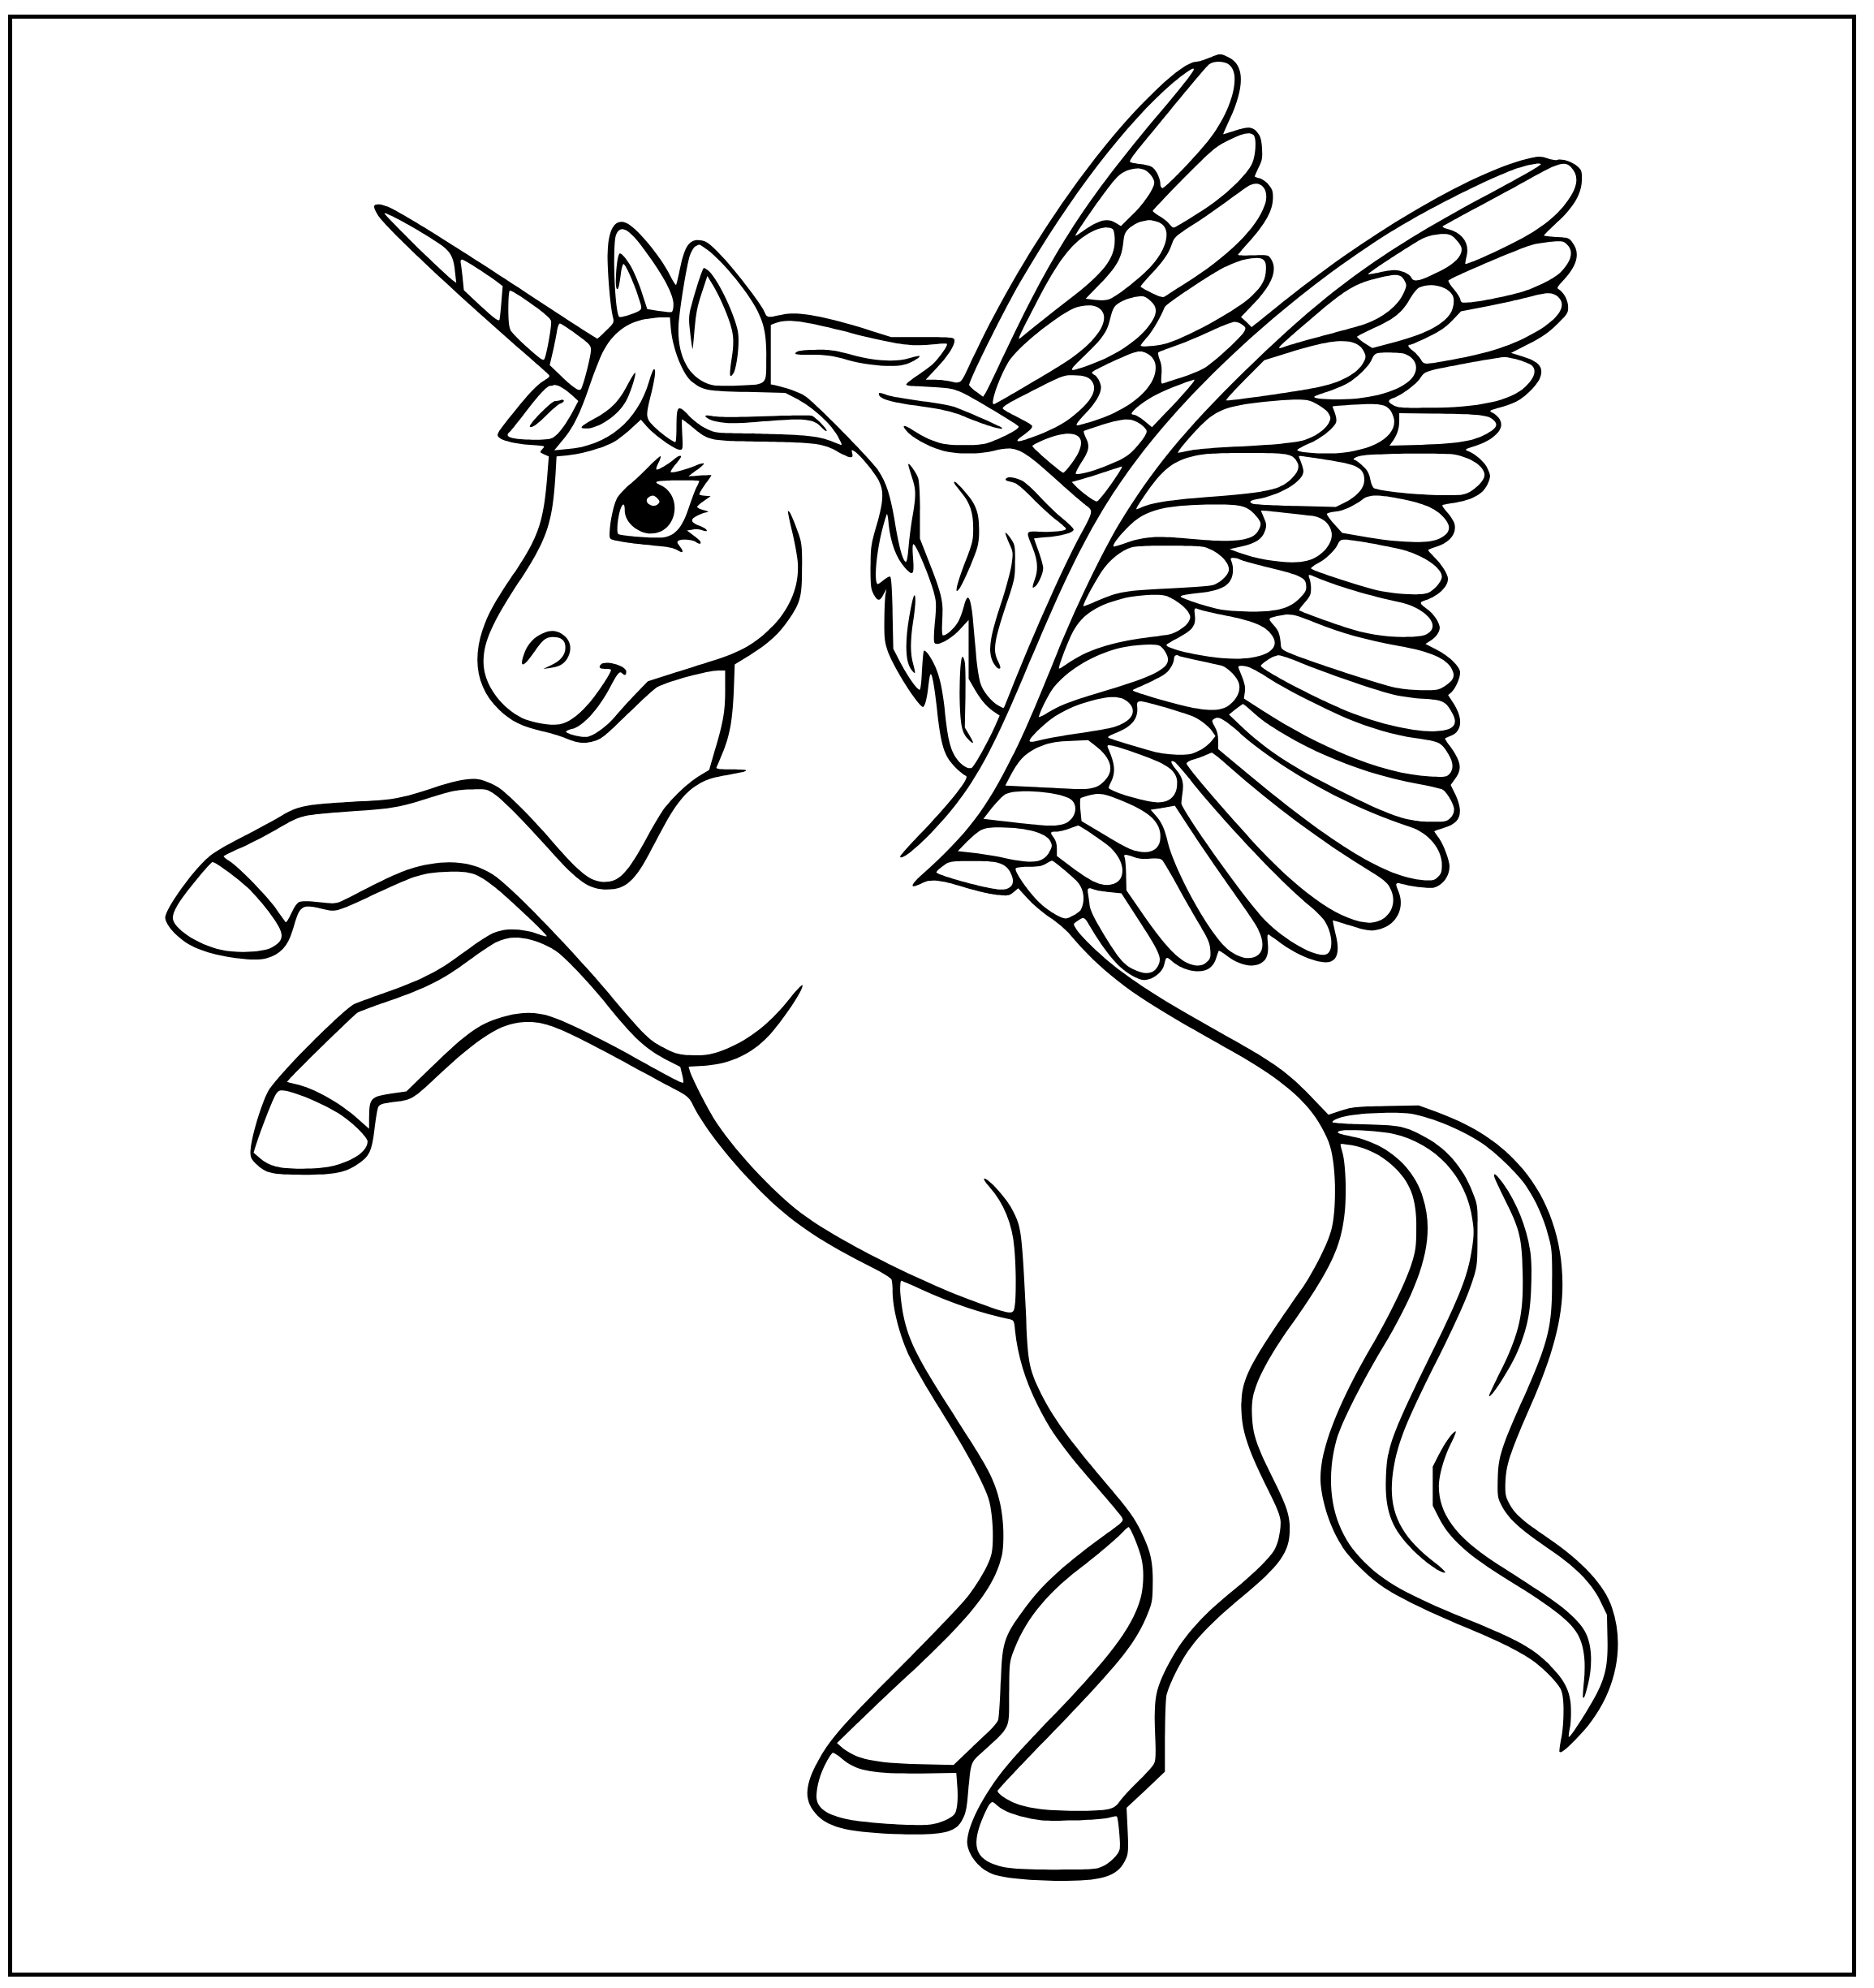 Printable Alicorn Coloring Page for kids.